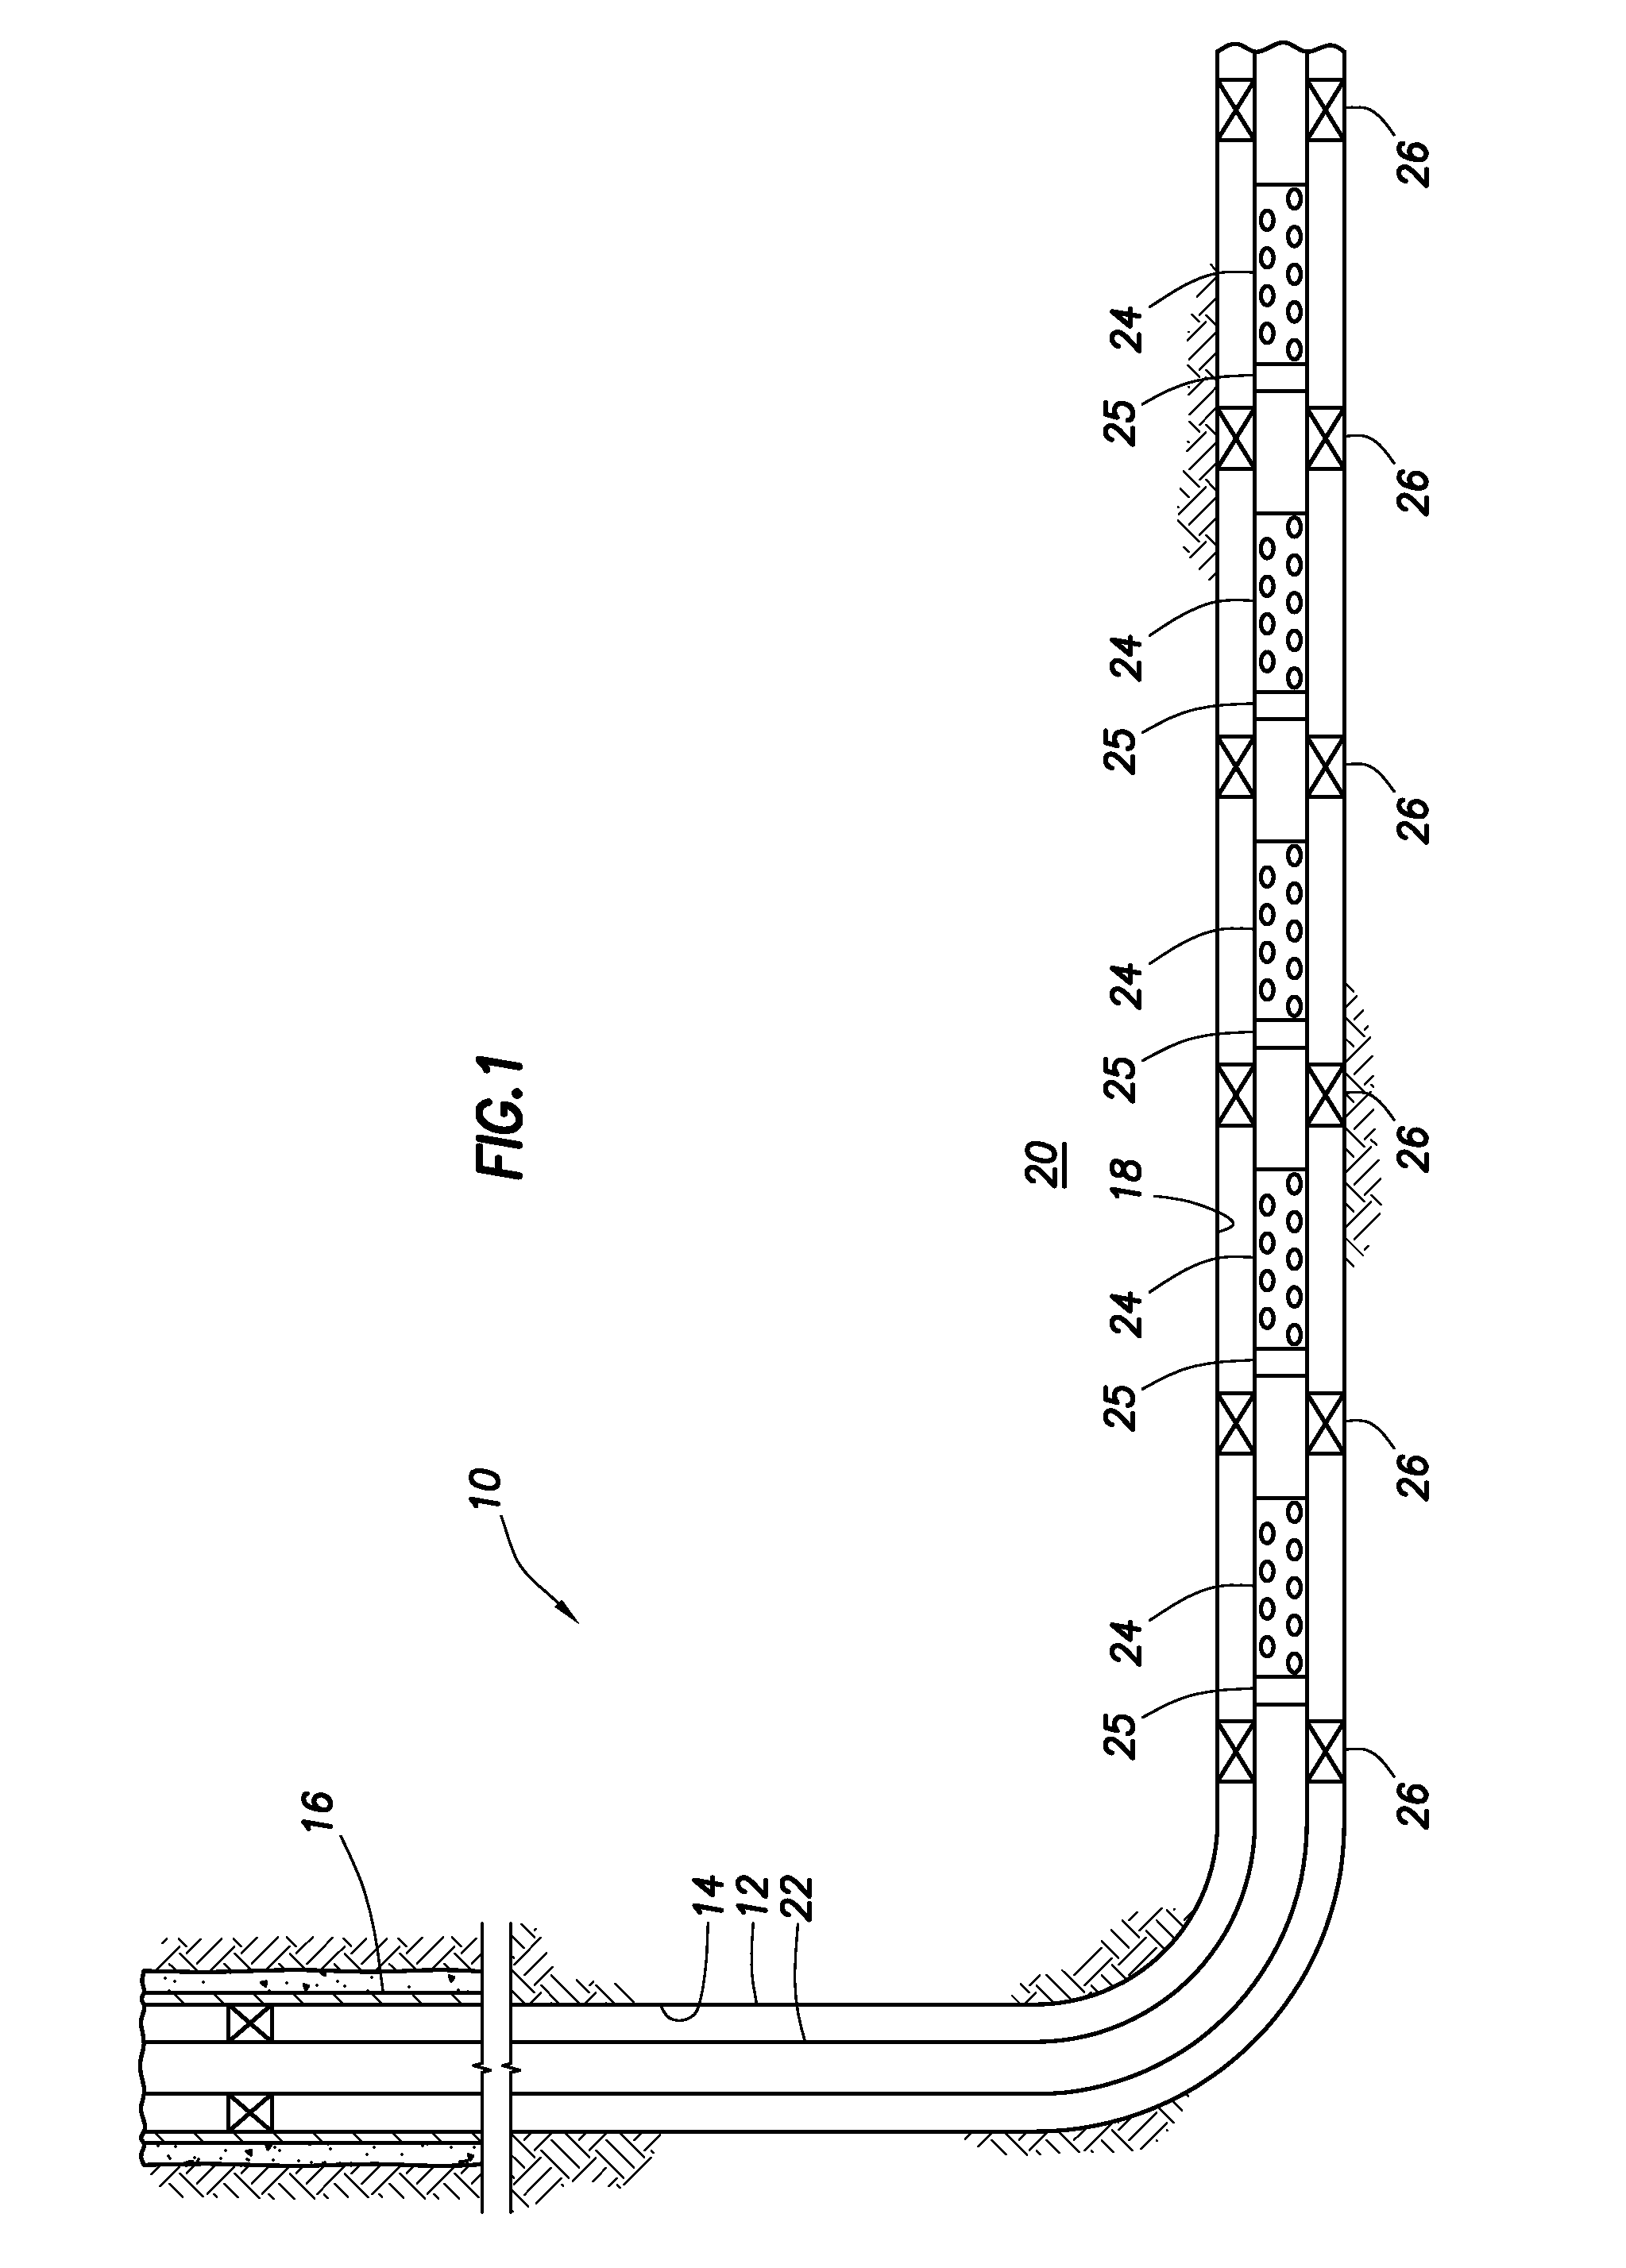 Method and apparatus for controlling fluid flow in an autonomous valve using a sticky switch